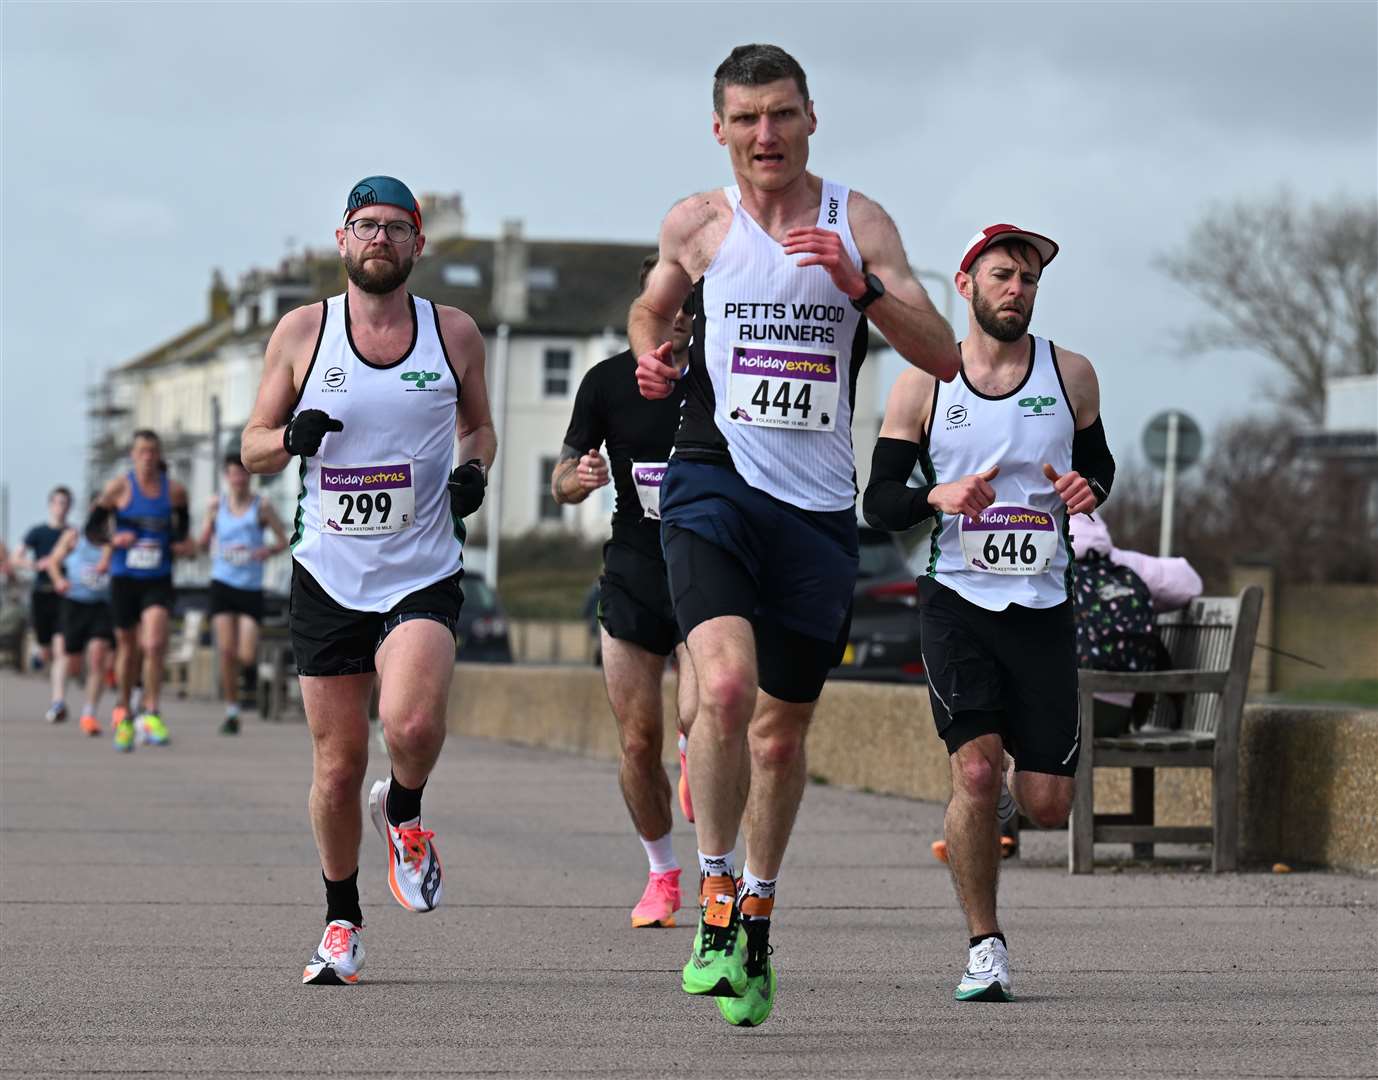 Petts Wood Runners' Dean Lenihan (No.444) runs with Damien Gregory (No.299) and Lee Sander-King (No.646), both of Maidstone Harriers. Picture: Barry Goodwin